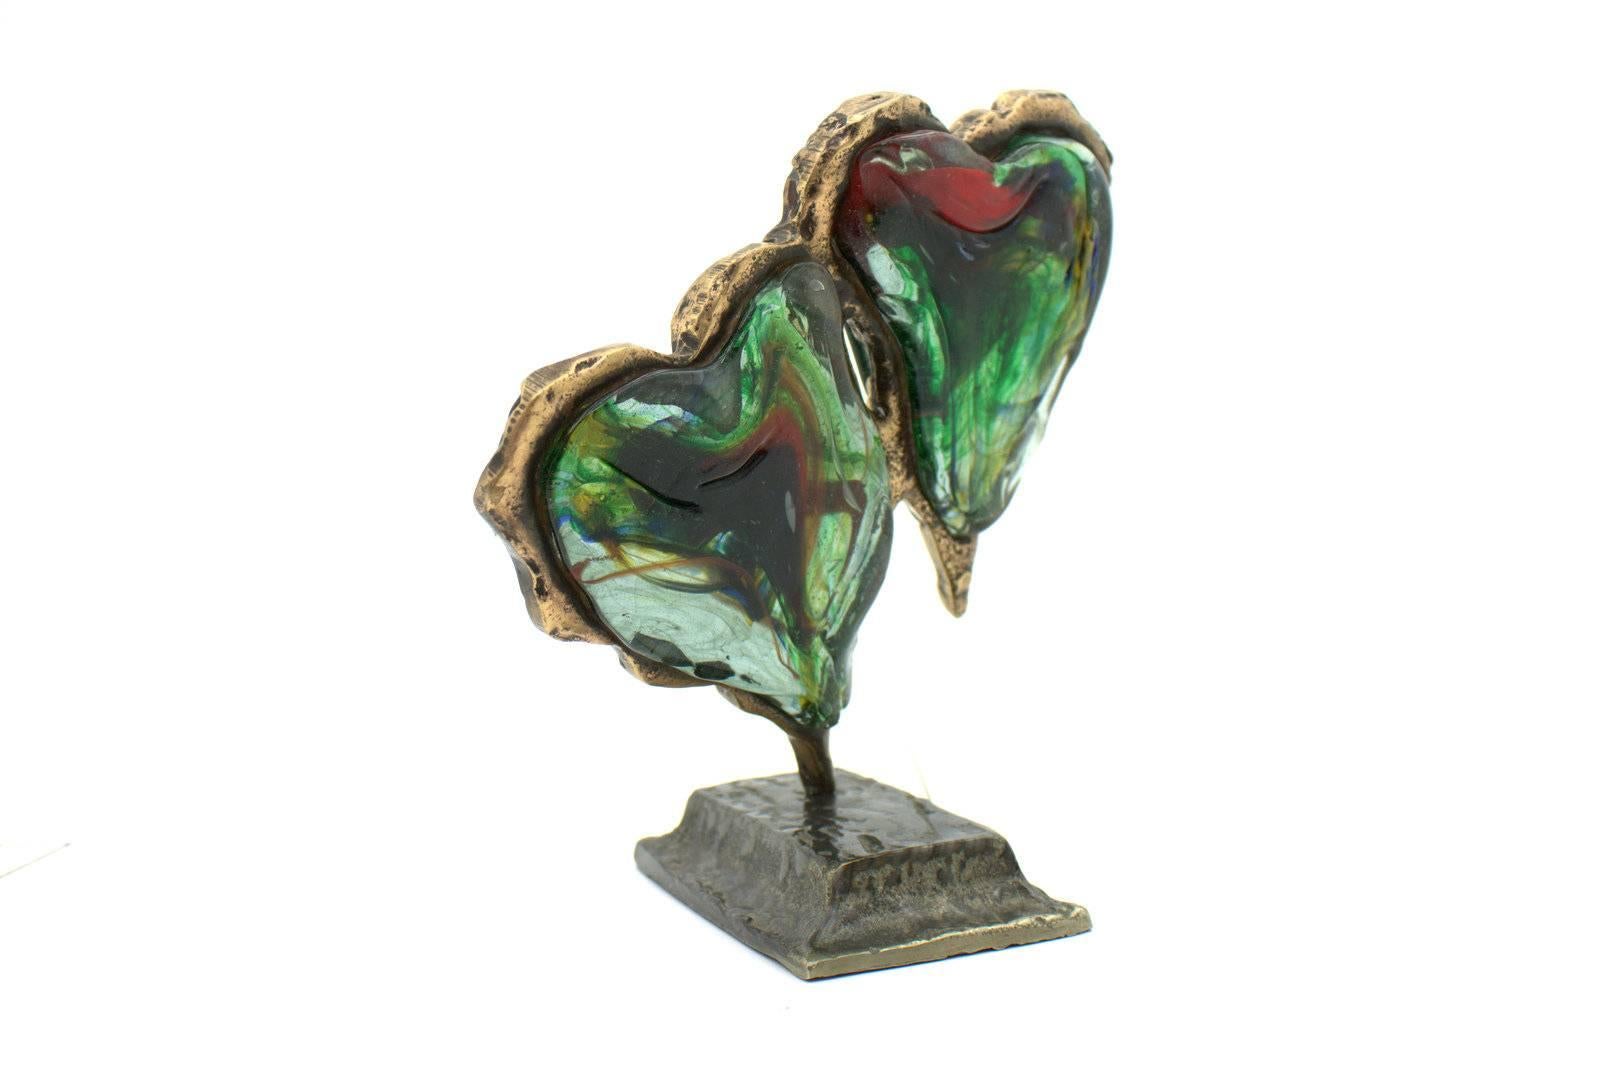 Yves Lohe glass sculpture two hearts, glass and bronze.
Excellent condition.

Worldwide shipping.